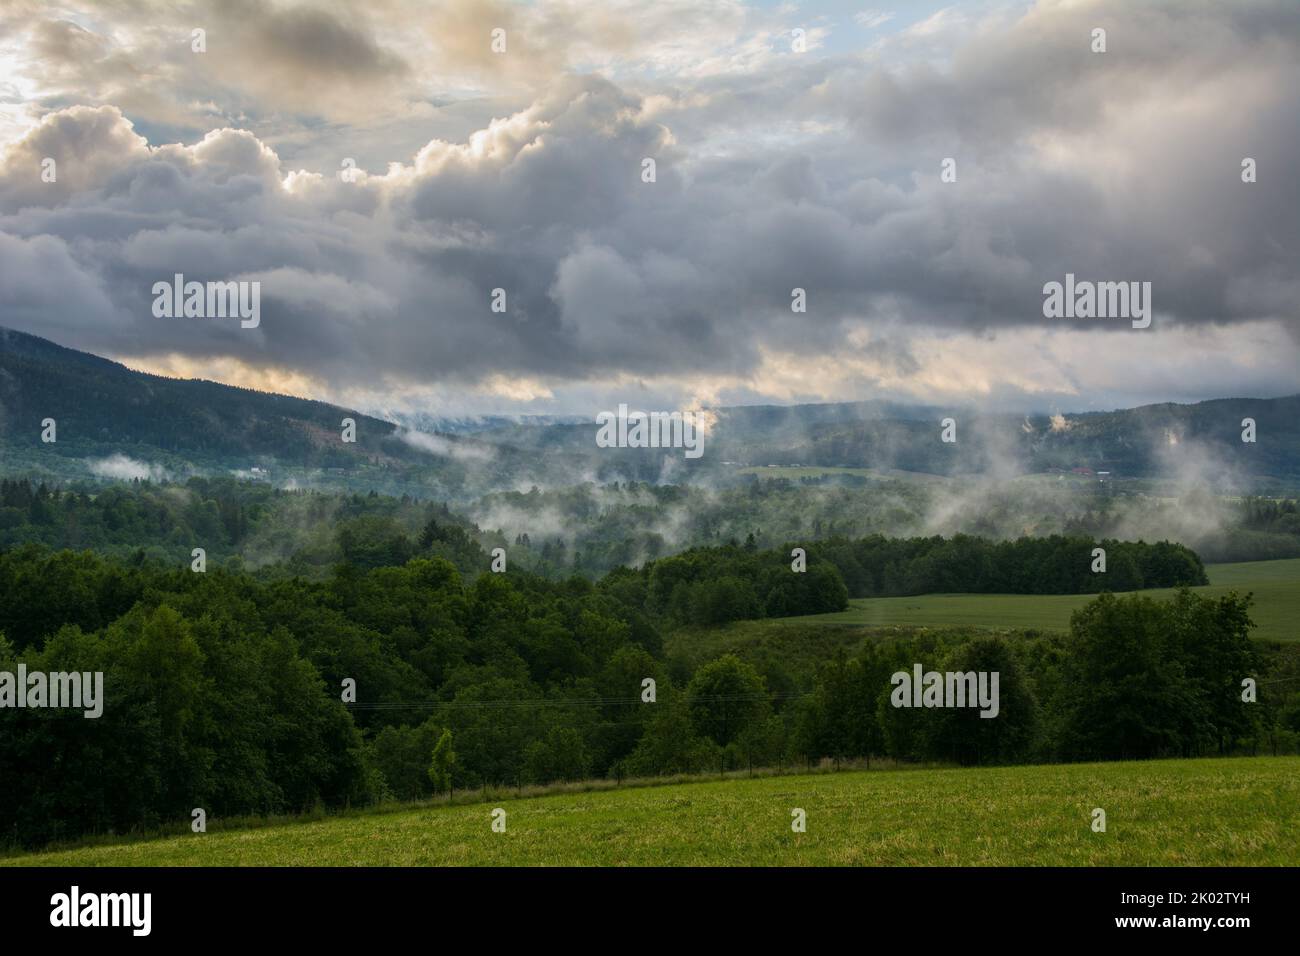 The beautiful view of forested mountains and a cloudy sky after a rainstorm in Lier valley, Norway Stock Photo